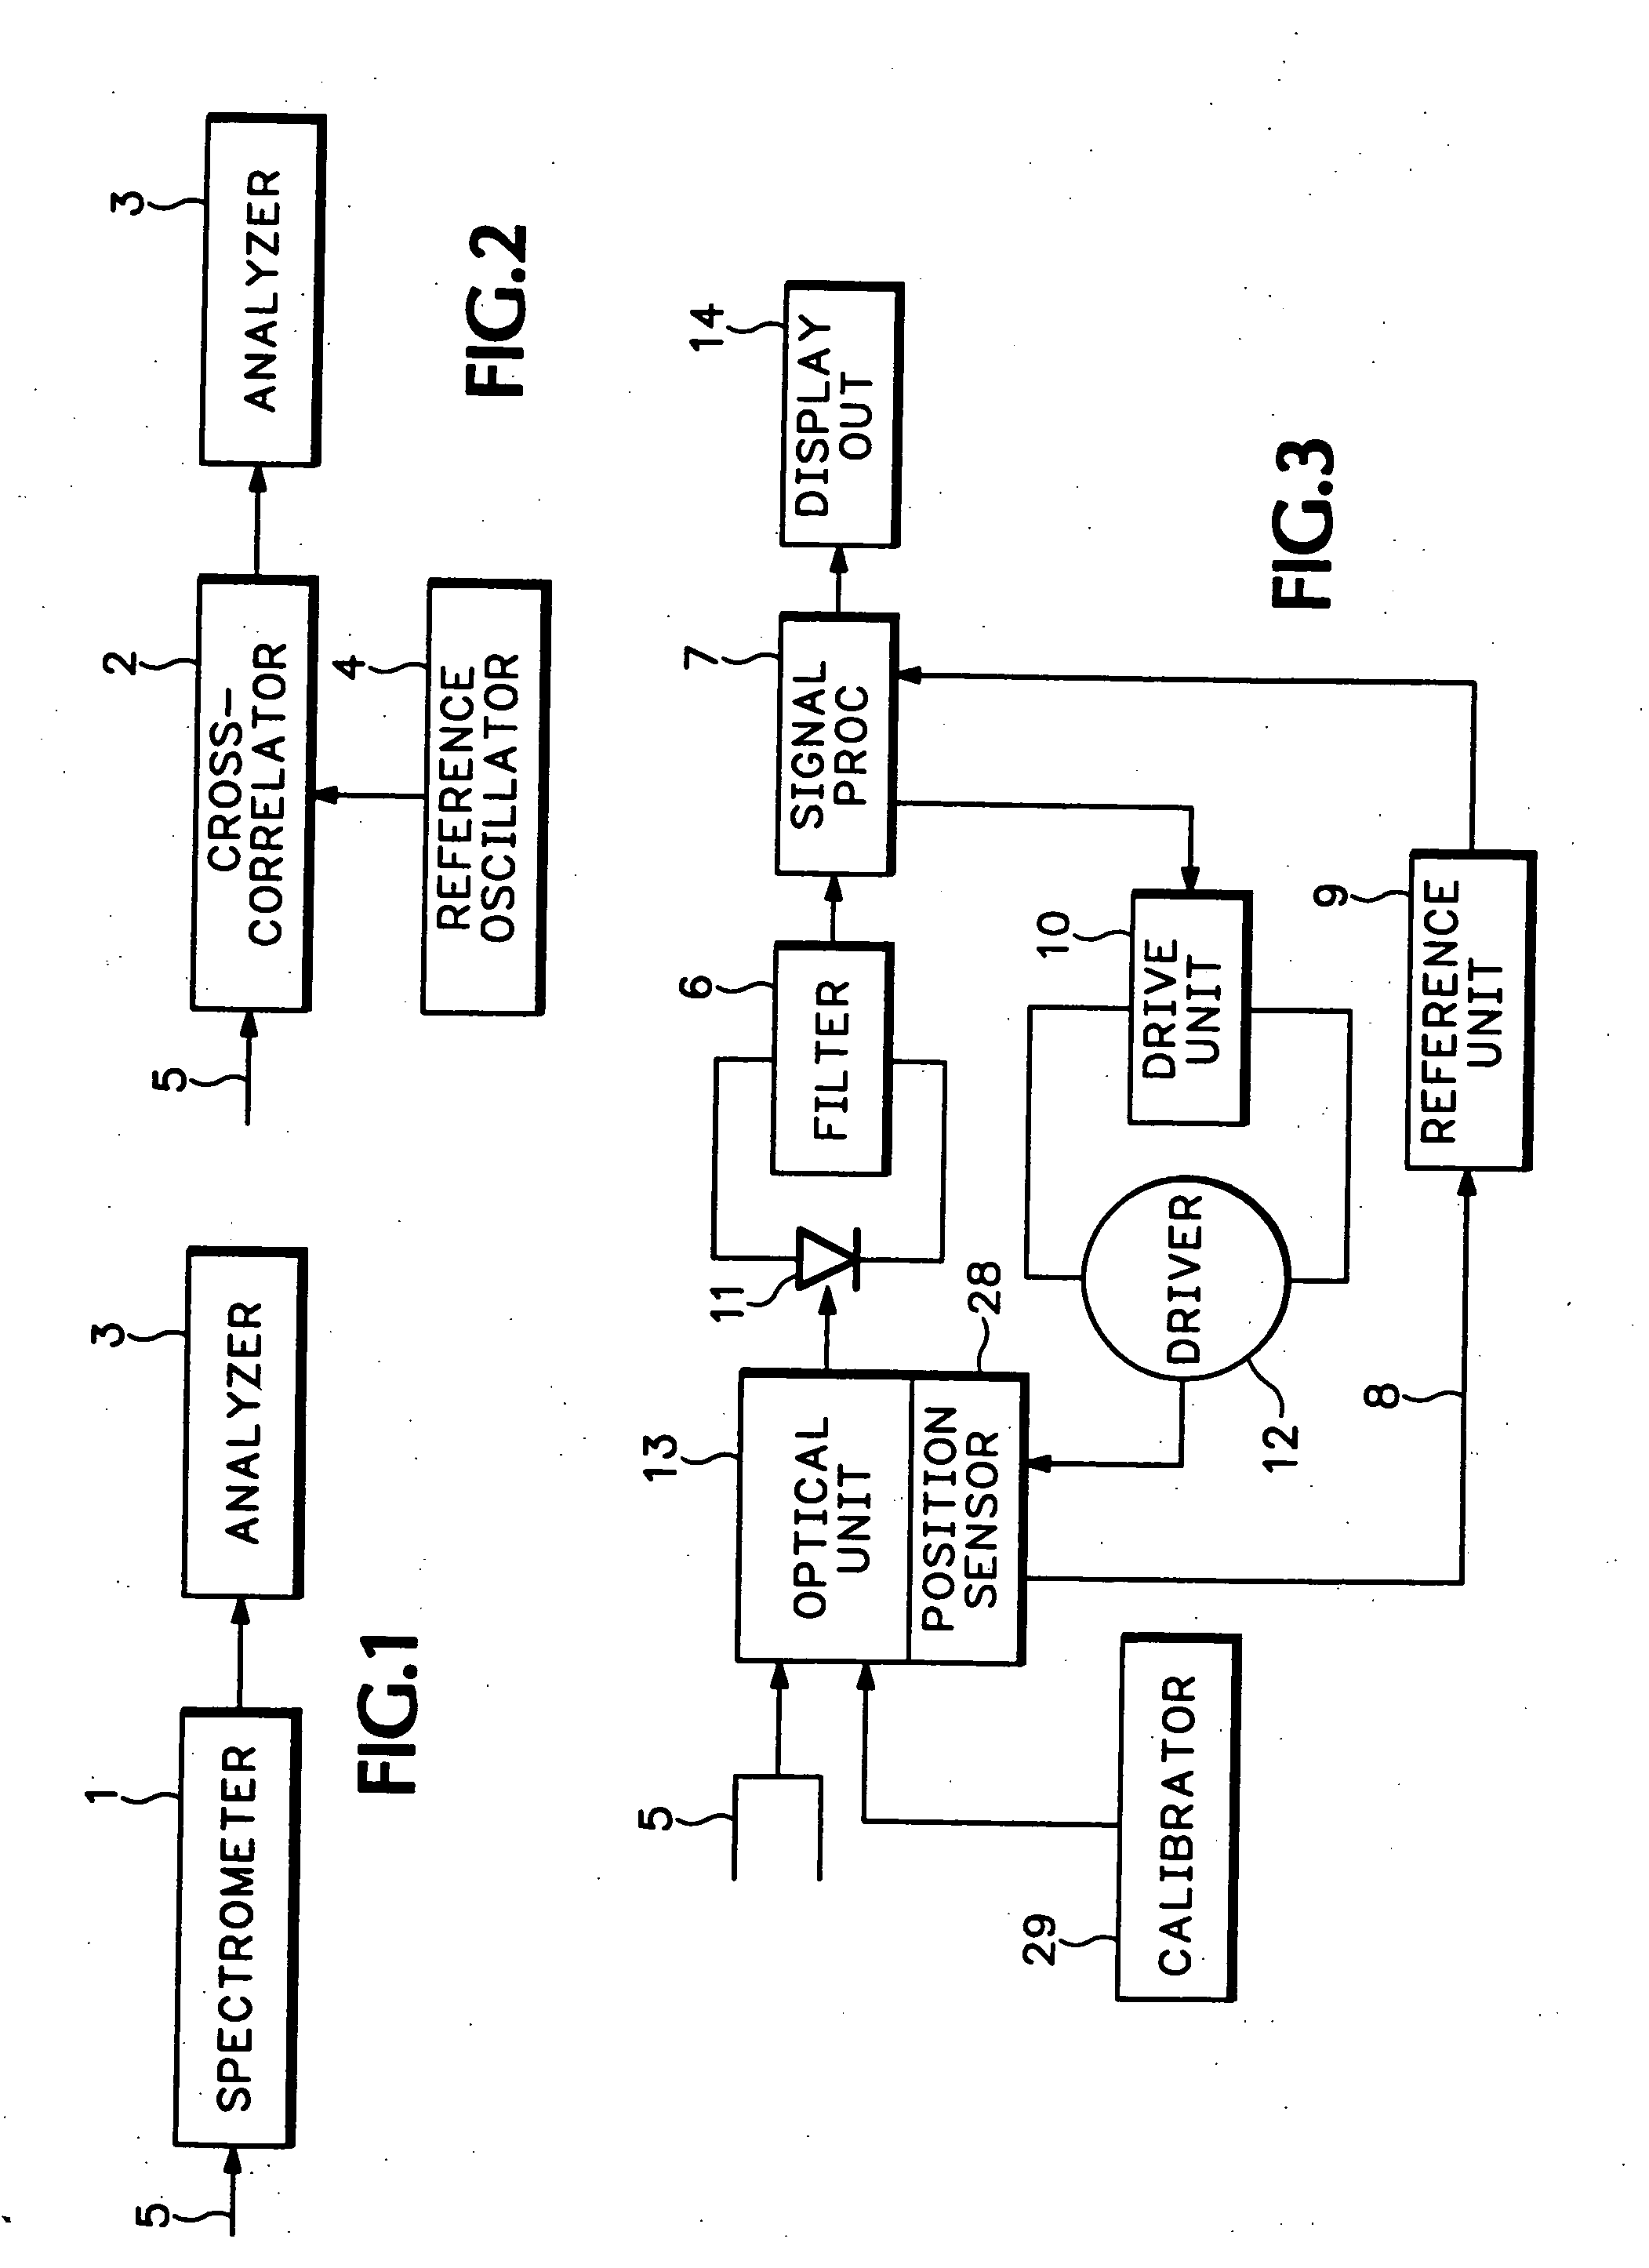 Array and method for monitoring the performance of DWDM multiwavelength systems